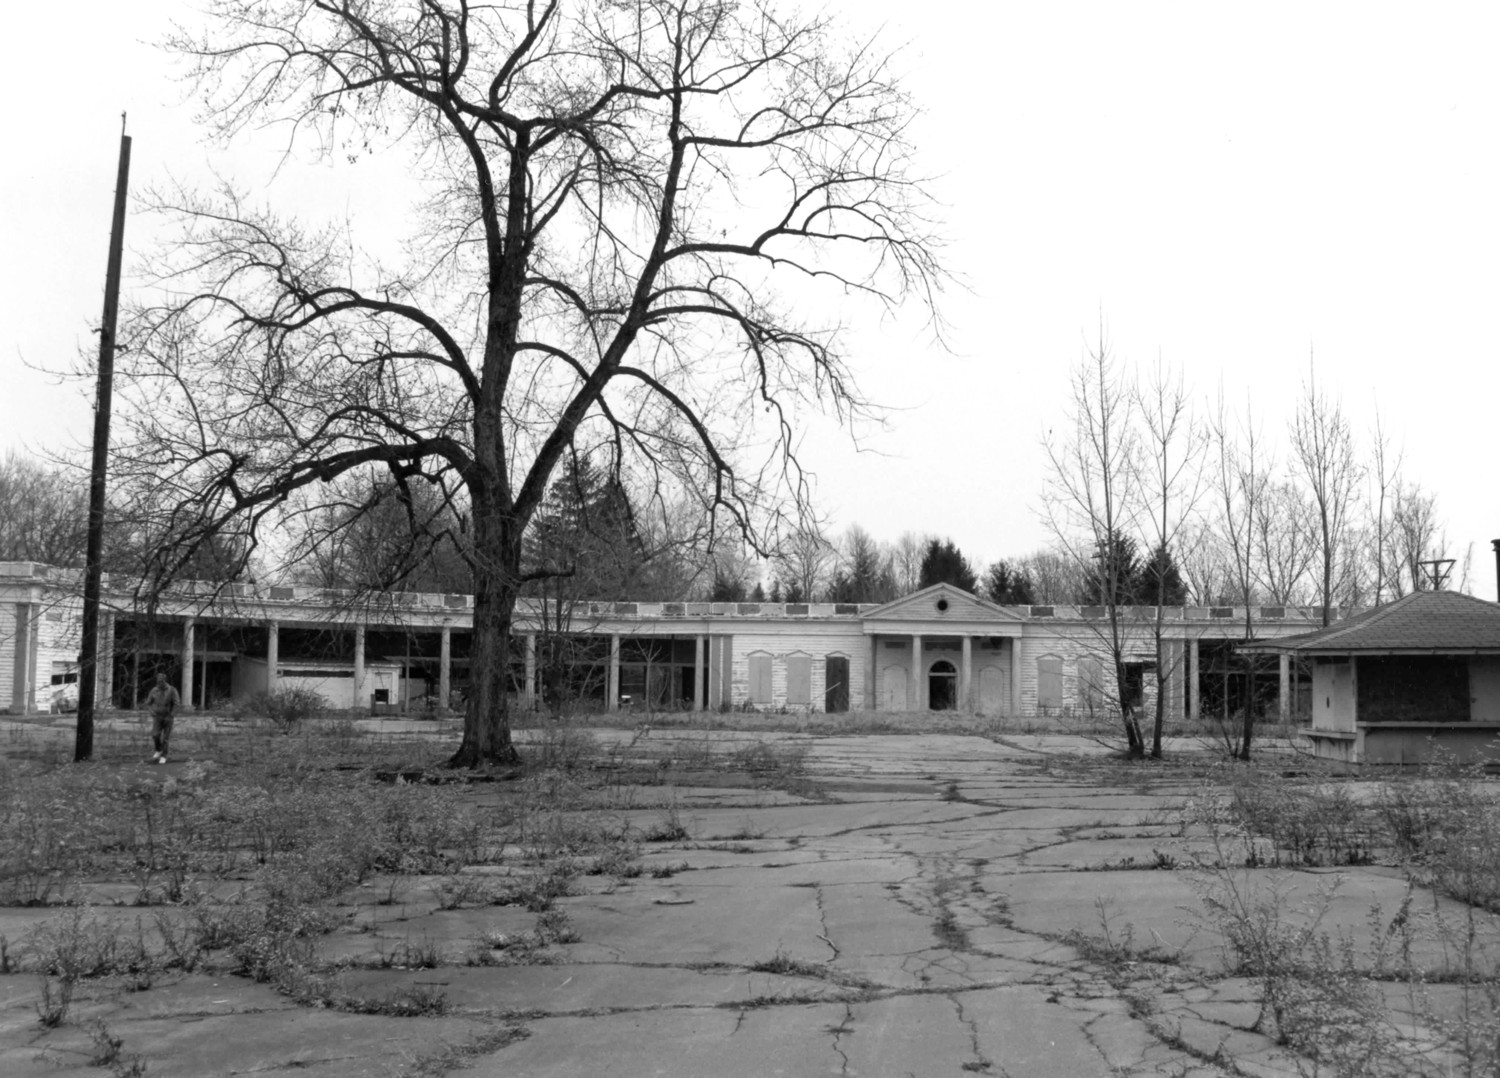 Idora Park, Youngstown Ohio Kiddie Land (former swimming pool) and former bathhouse, looking east (1992)